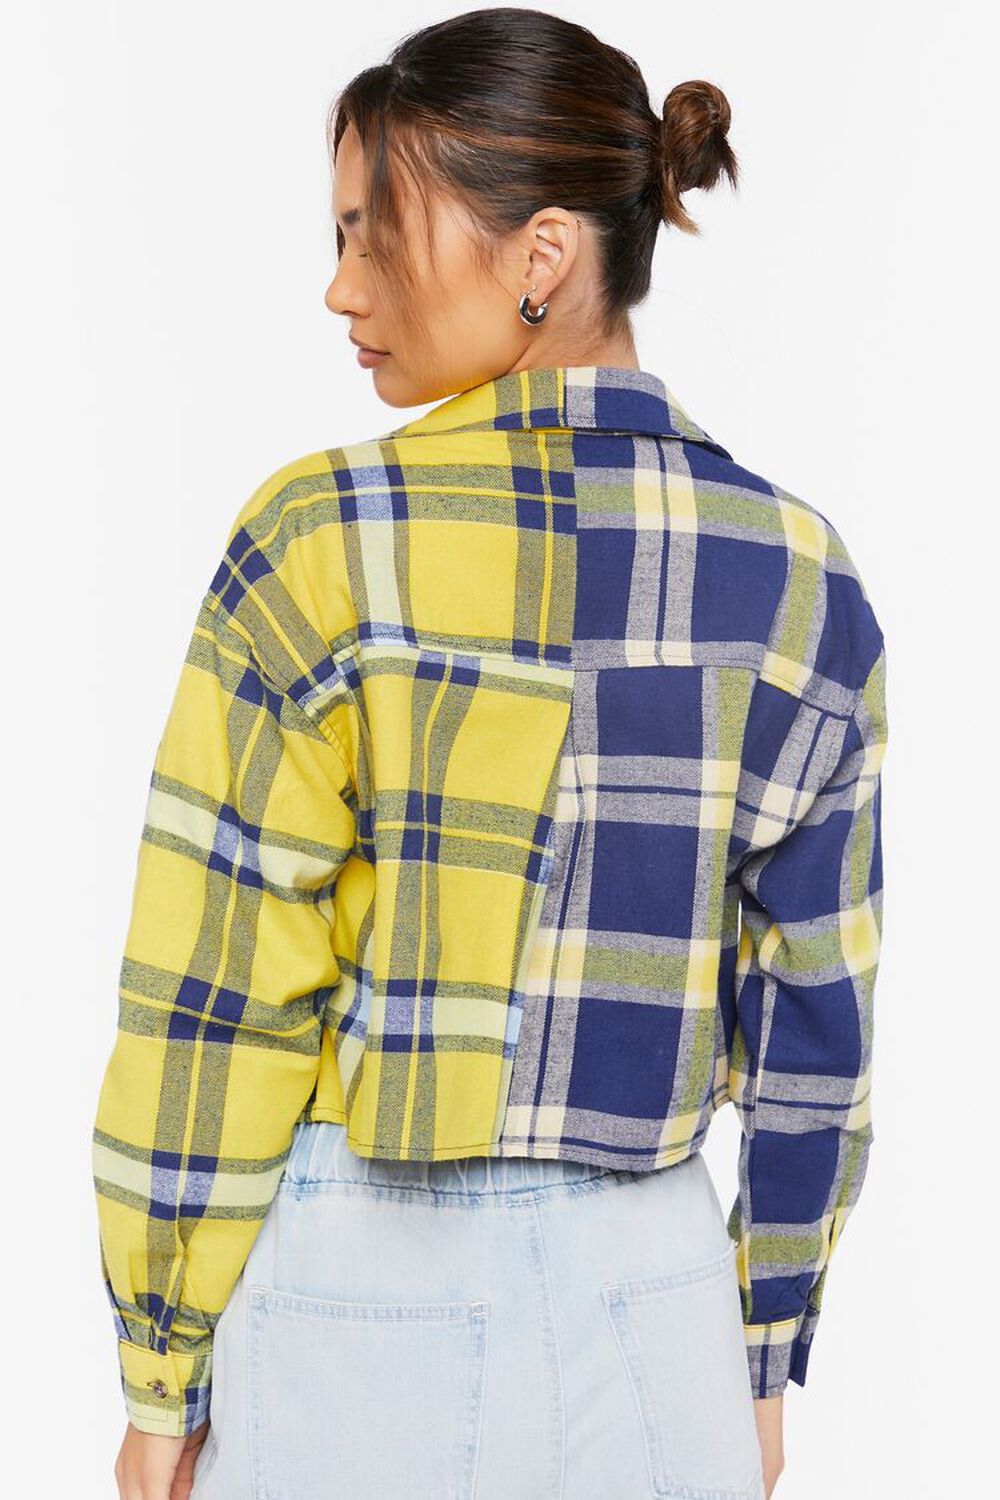 NAVY/GOLD Colorblock Plaid Cropped Shirt, image 3